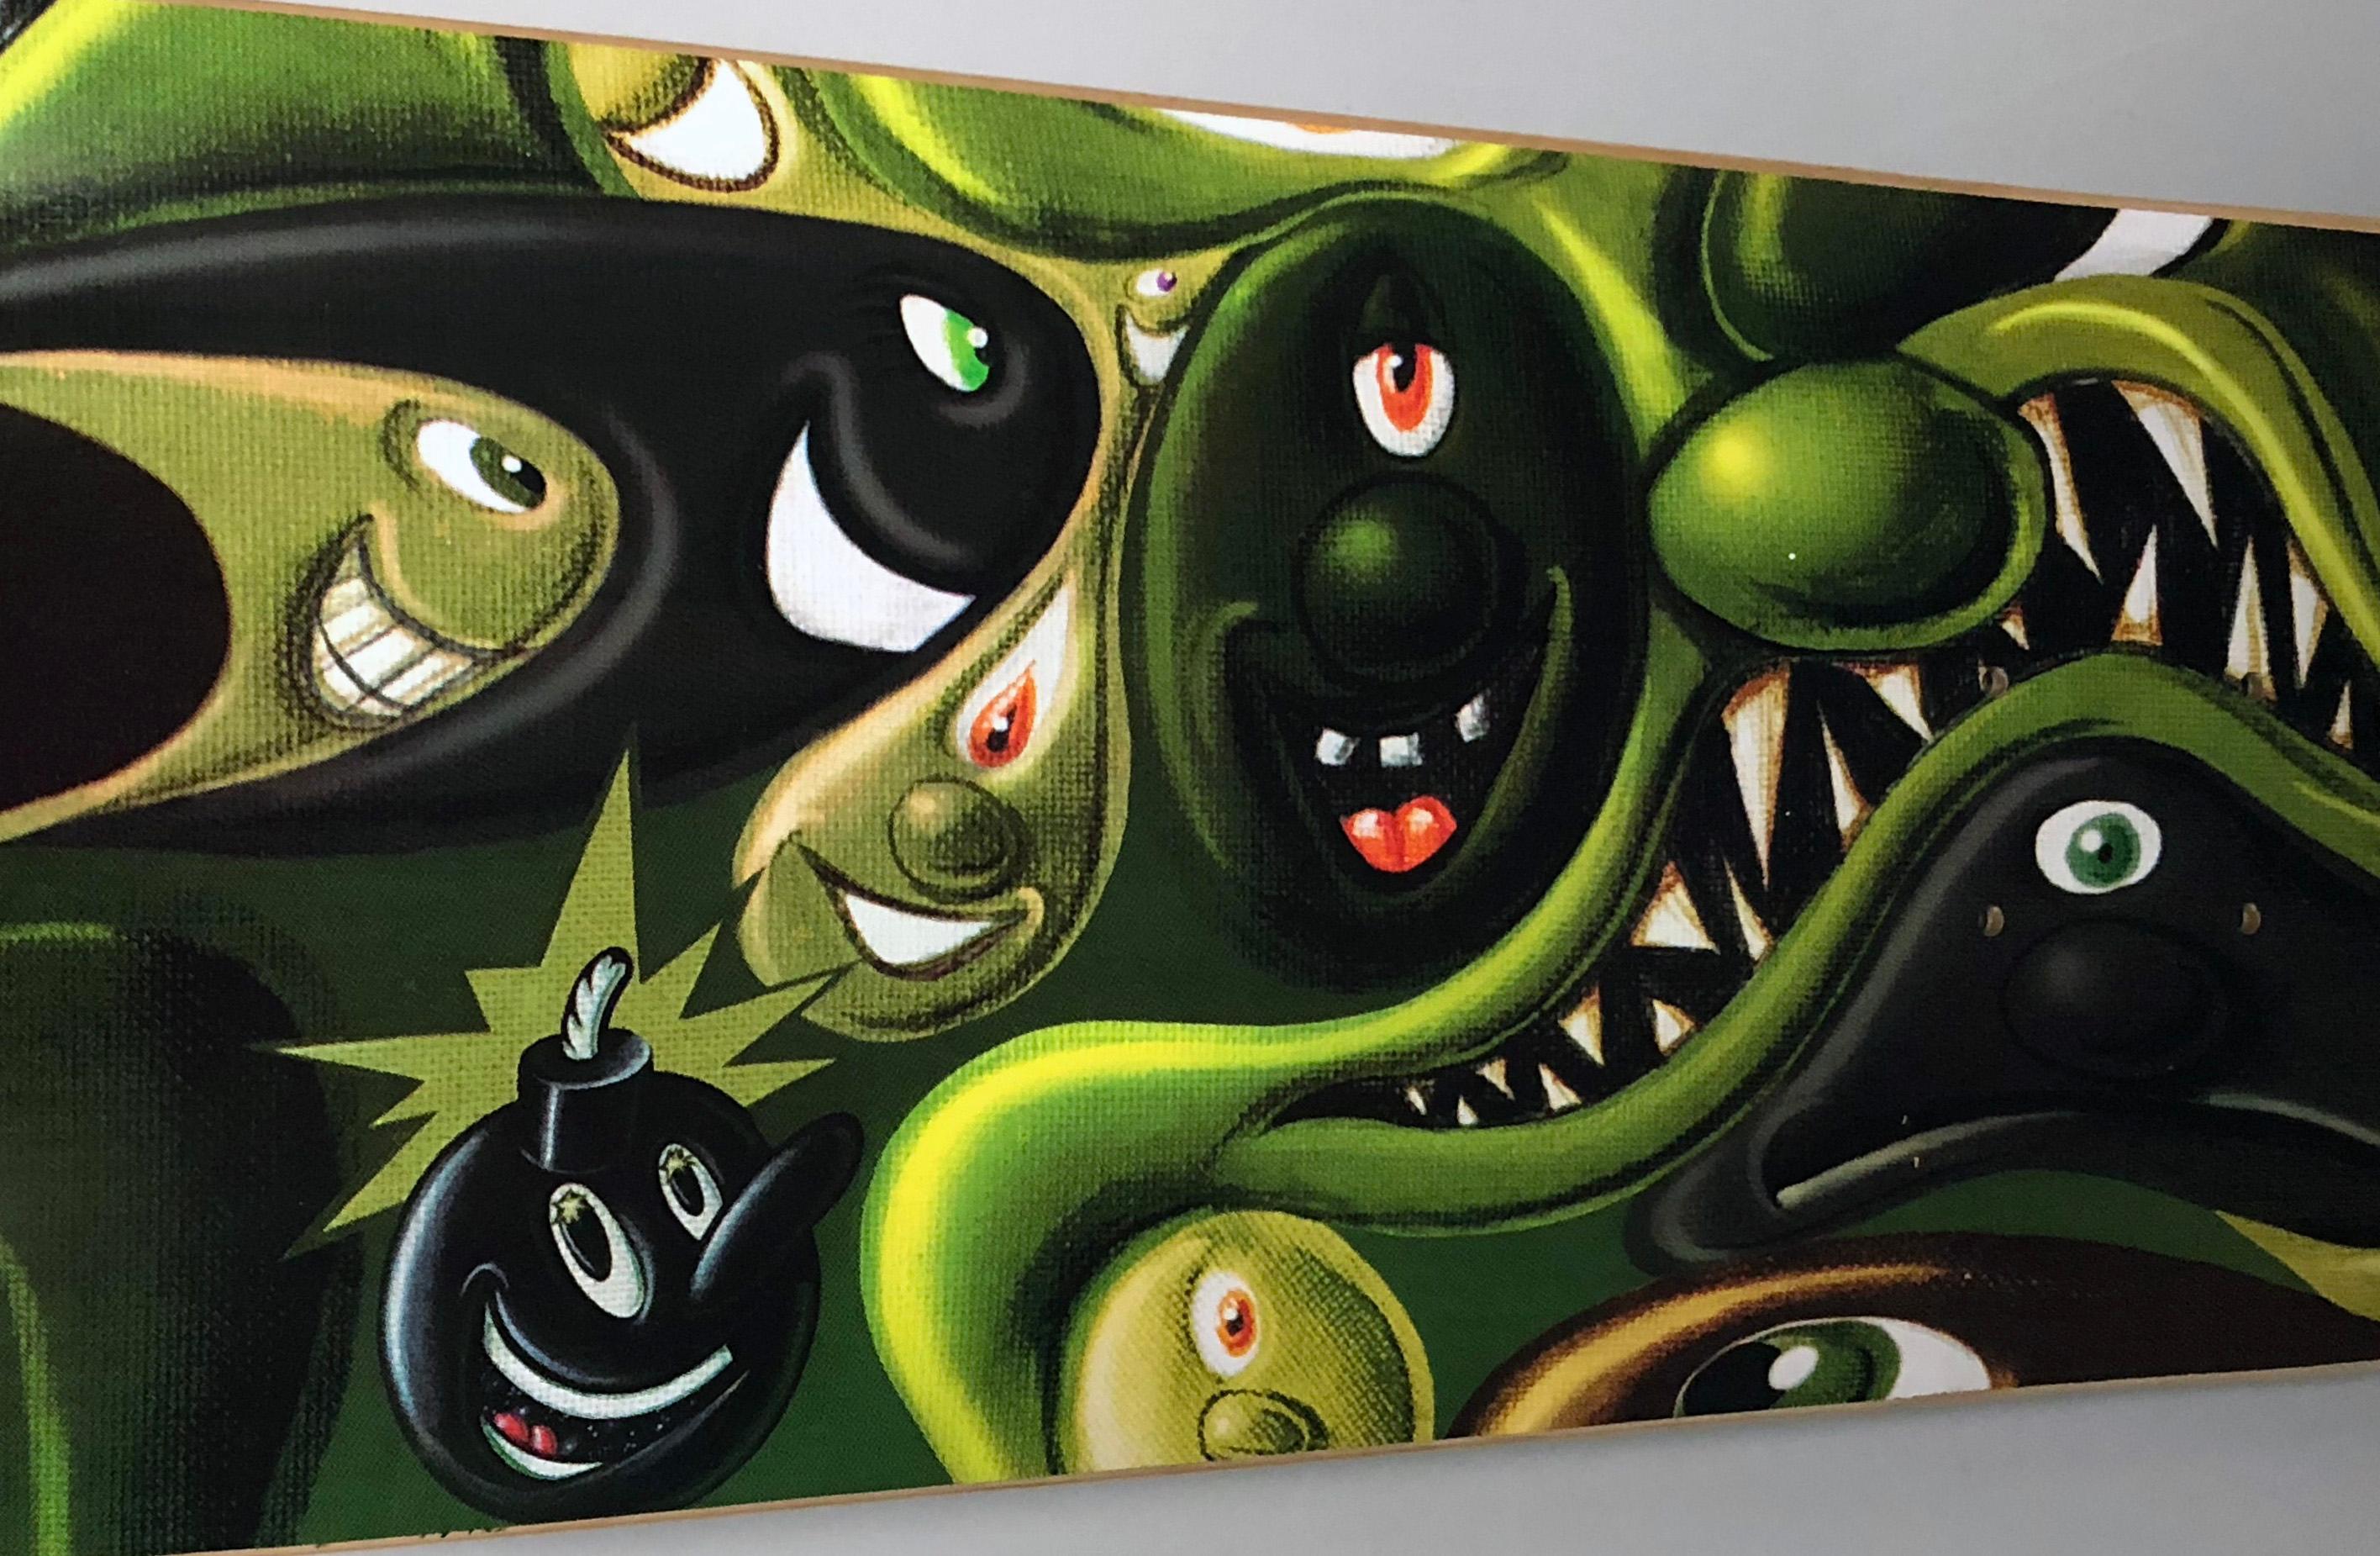 Kenny Scharf Skateboard Deck 2015
Fun, cool, vibrant original pop art without breaking the bank... Featuring Scharf's signature liveliness and character-driven motifs, this board makes for unique wall art that stands out in any room. 


Medium: